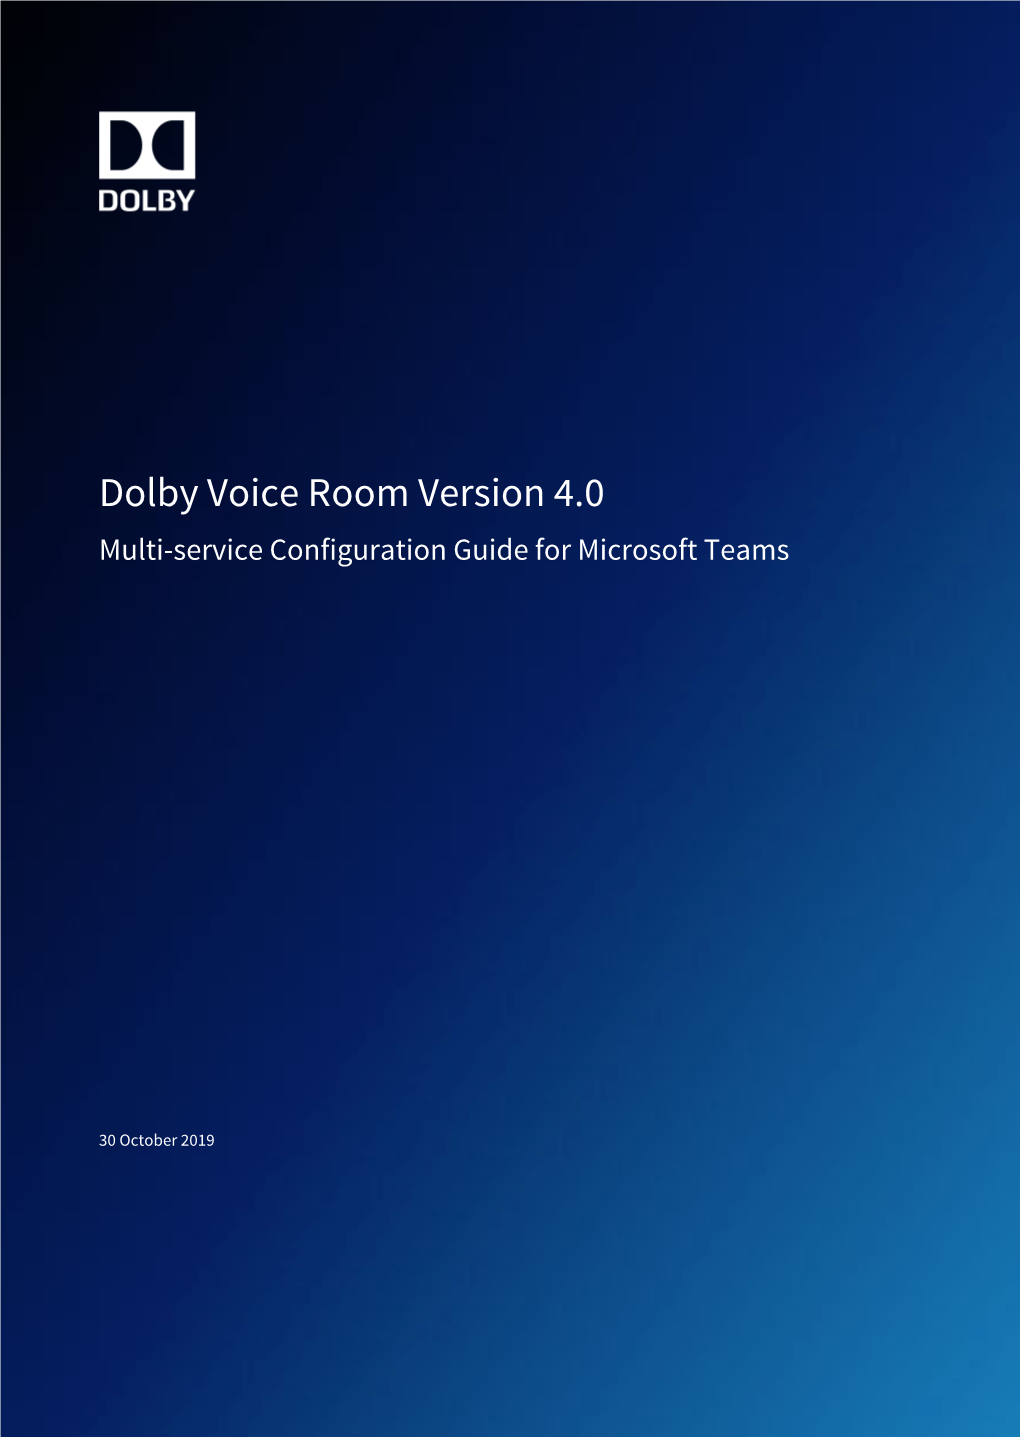 Dolby Voice Room Version 4.0 Multi-Service Configuration Guide for Microsoft Teams